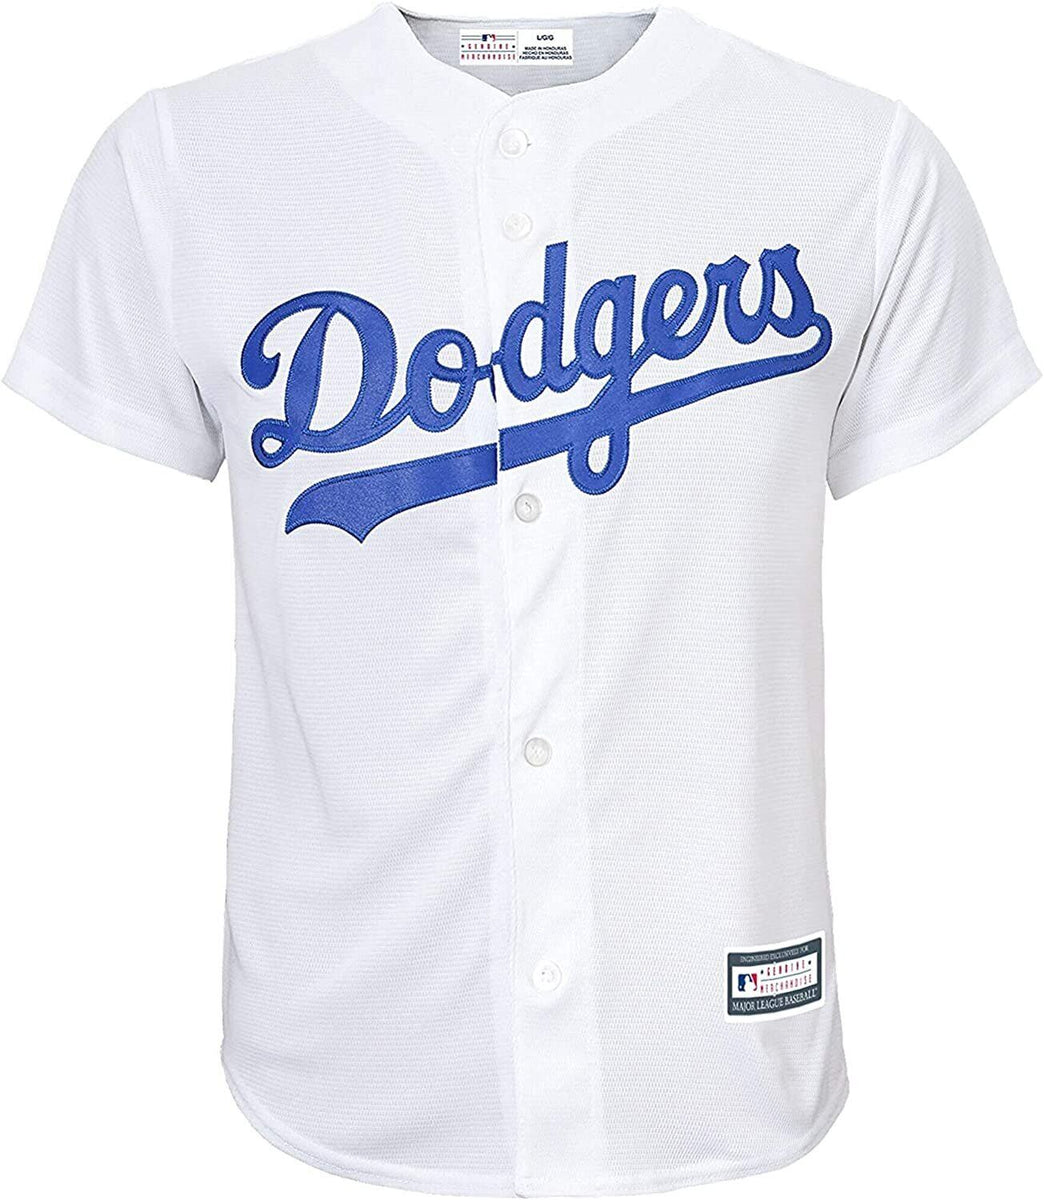 Los Angeles Dodgers Youth (8-20) Jersey Outerstuff #42 Jackie